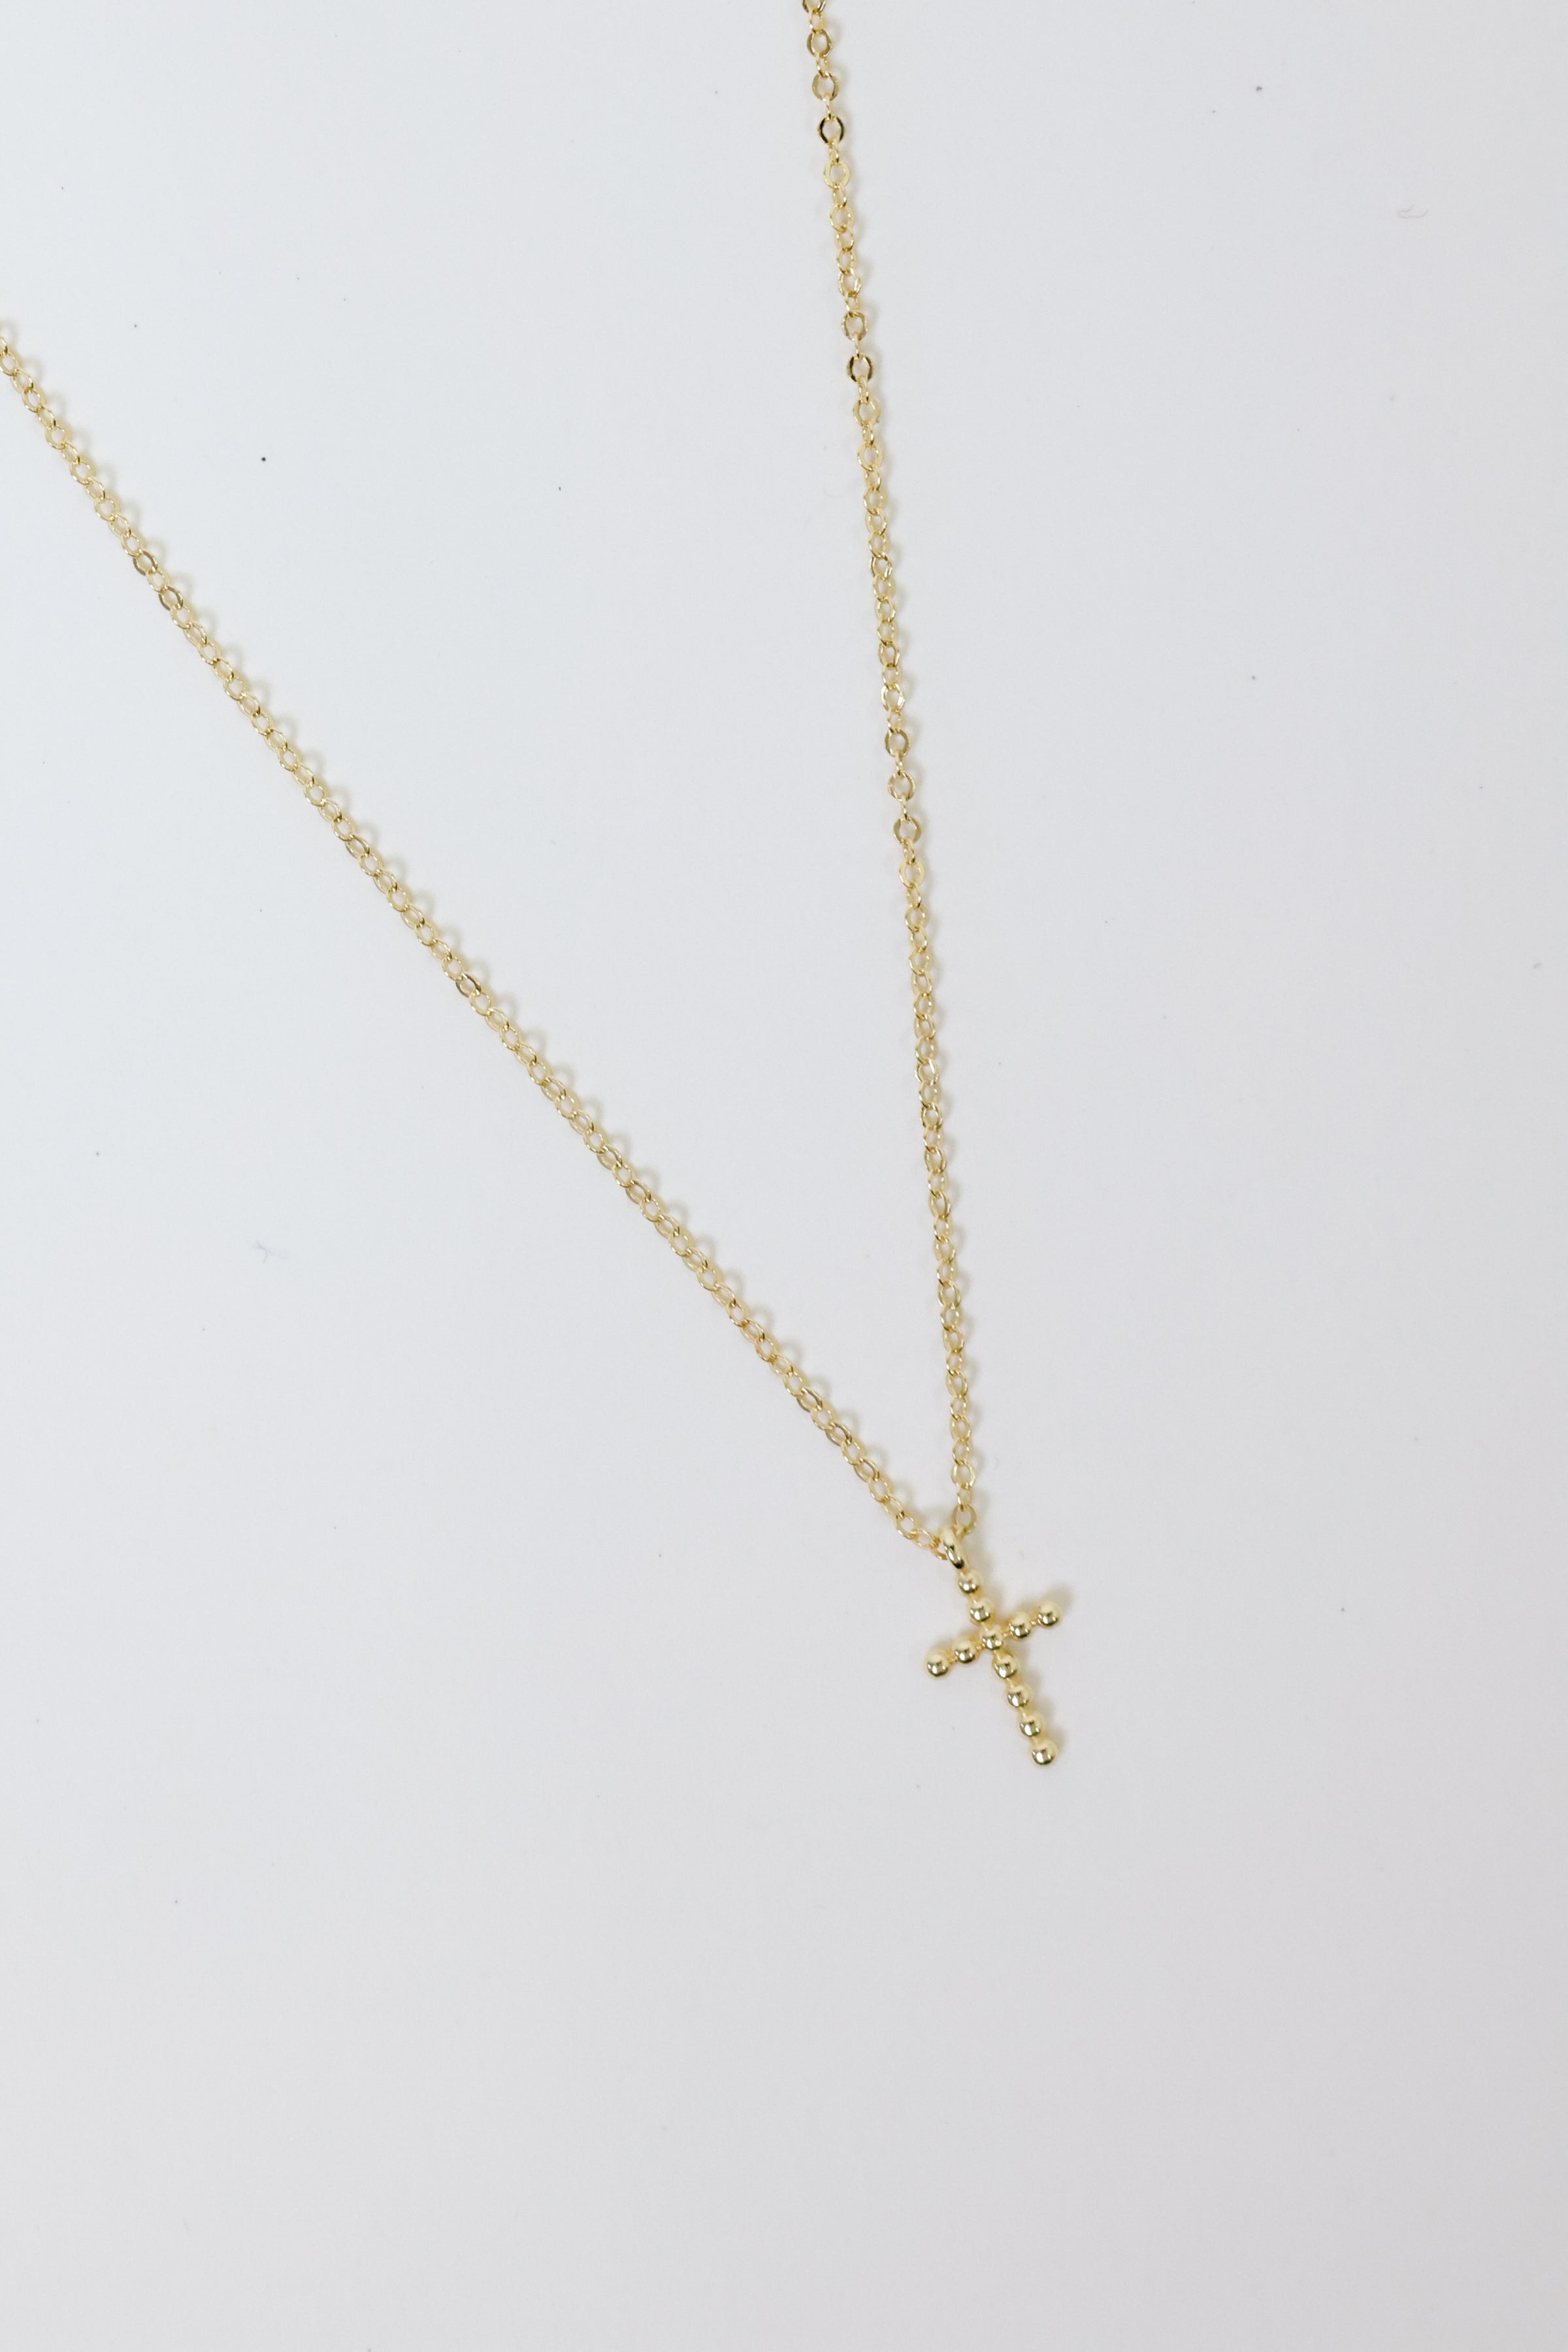 PG Designs Solid Beaded Cross Necklace